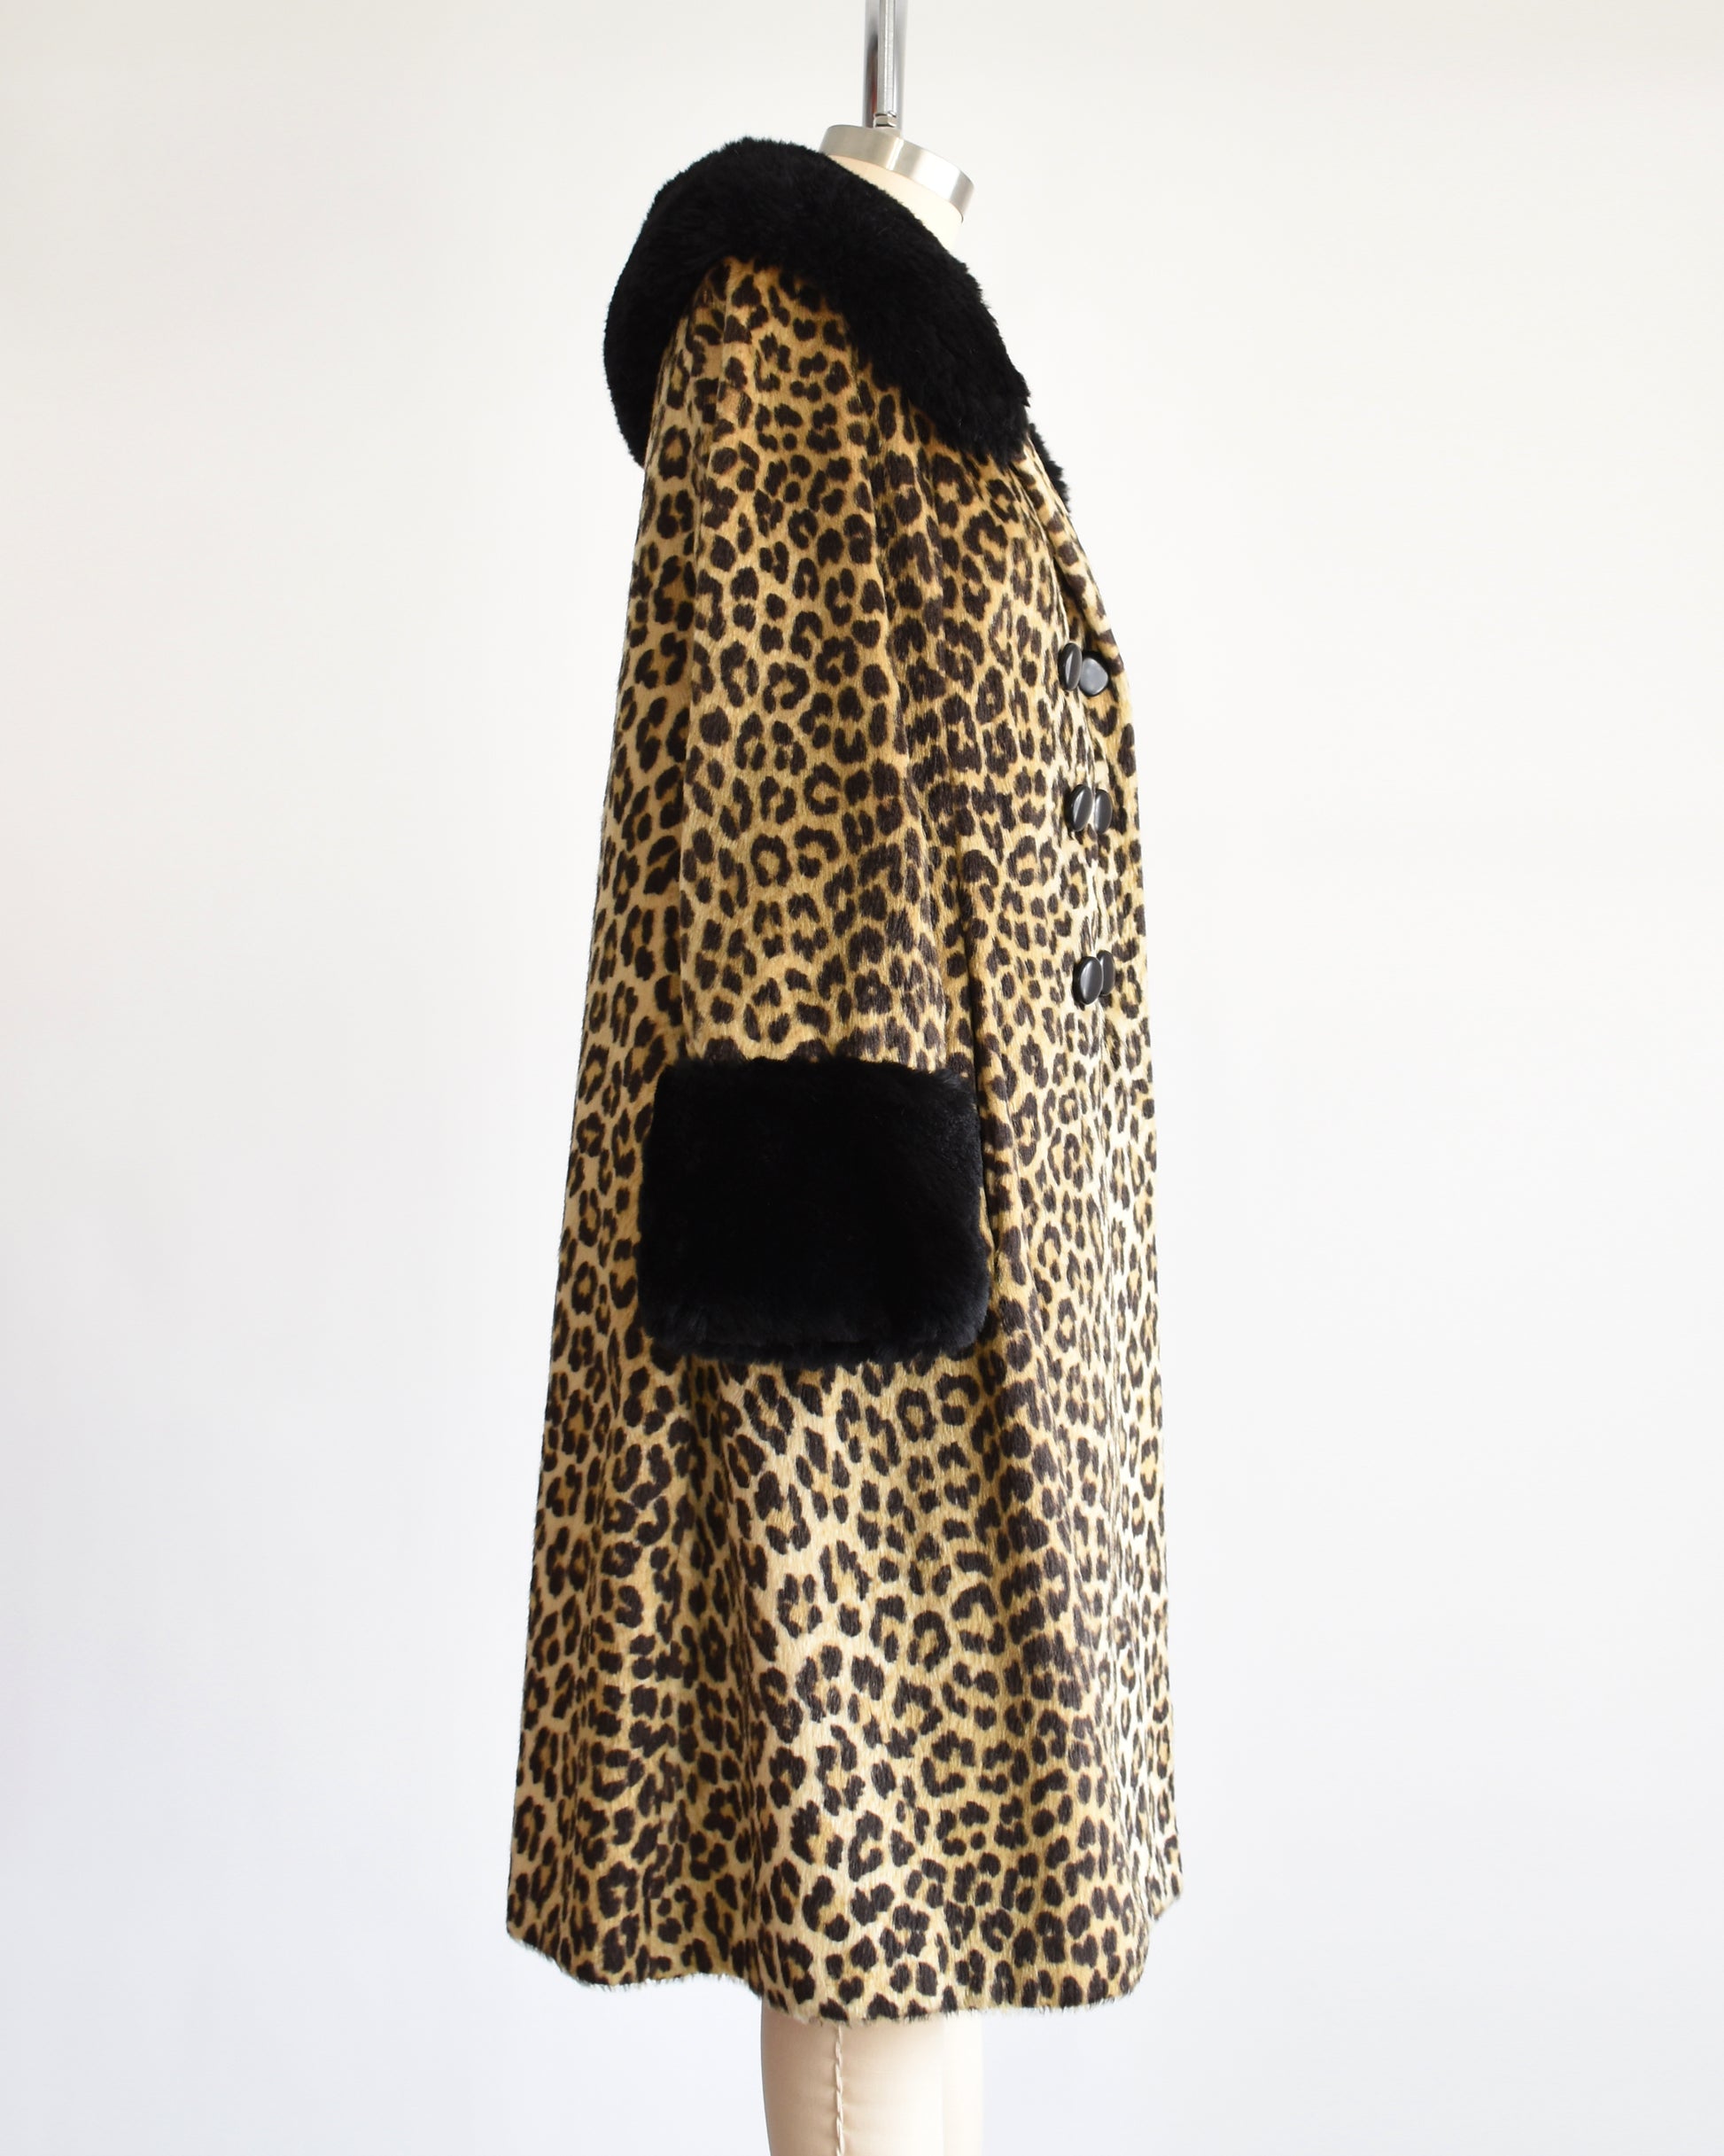 Side view of a vintage 1960s faux fur leopard print coat. Black plush trim along the collar and on the cuffs.